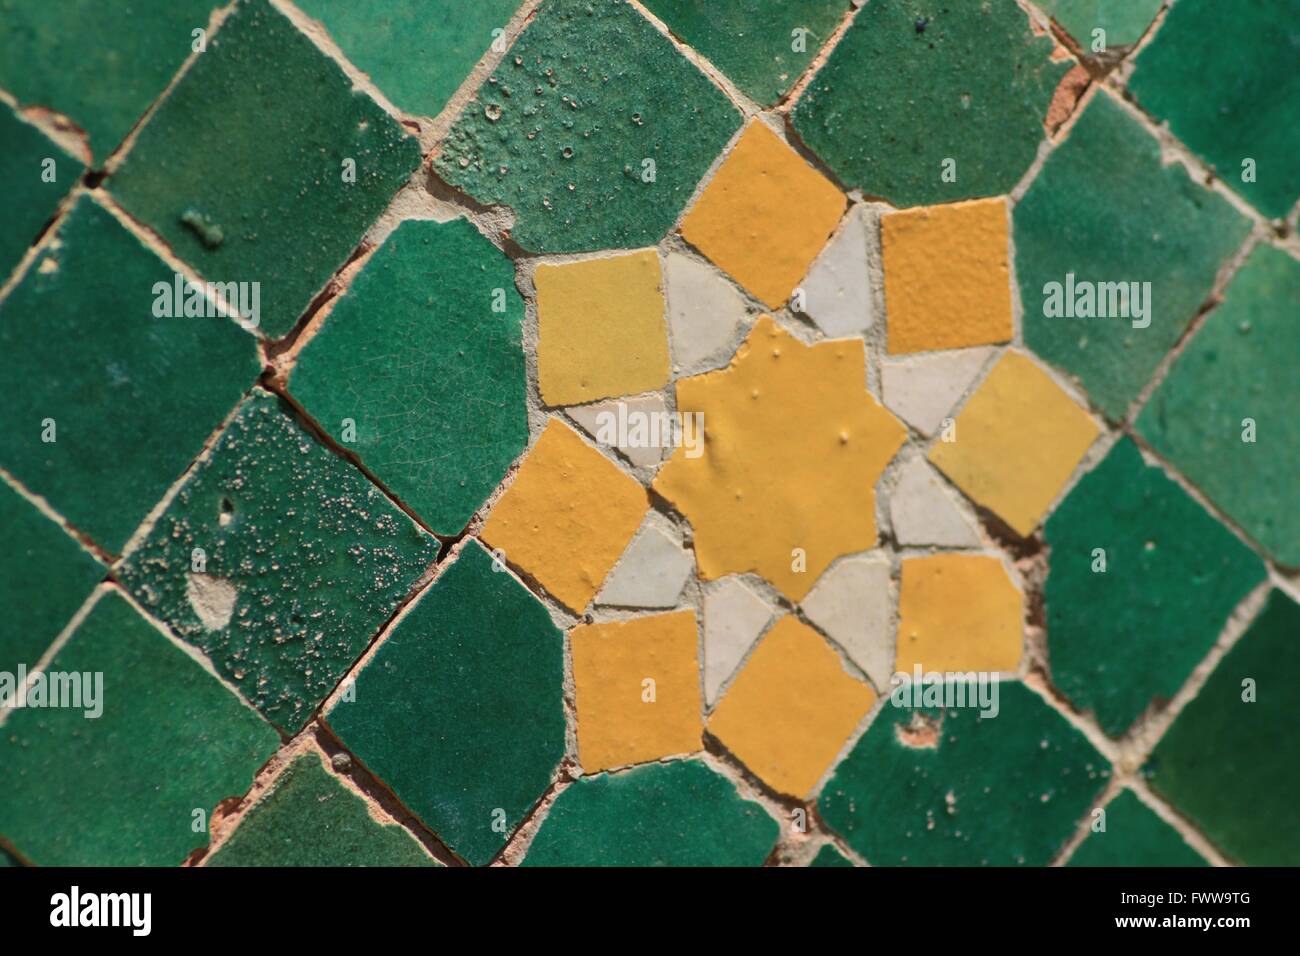 Gold Star in Morocco, ancient tiles Stock Photo